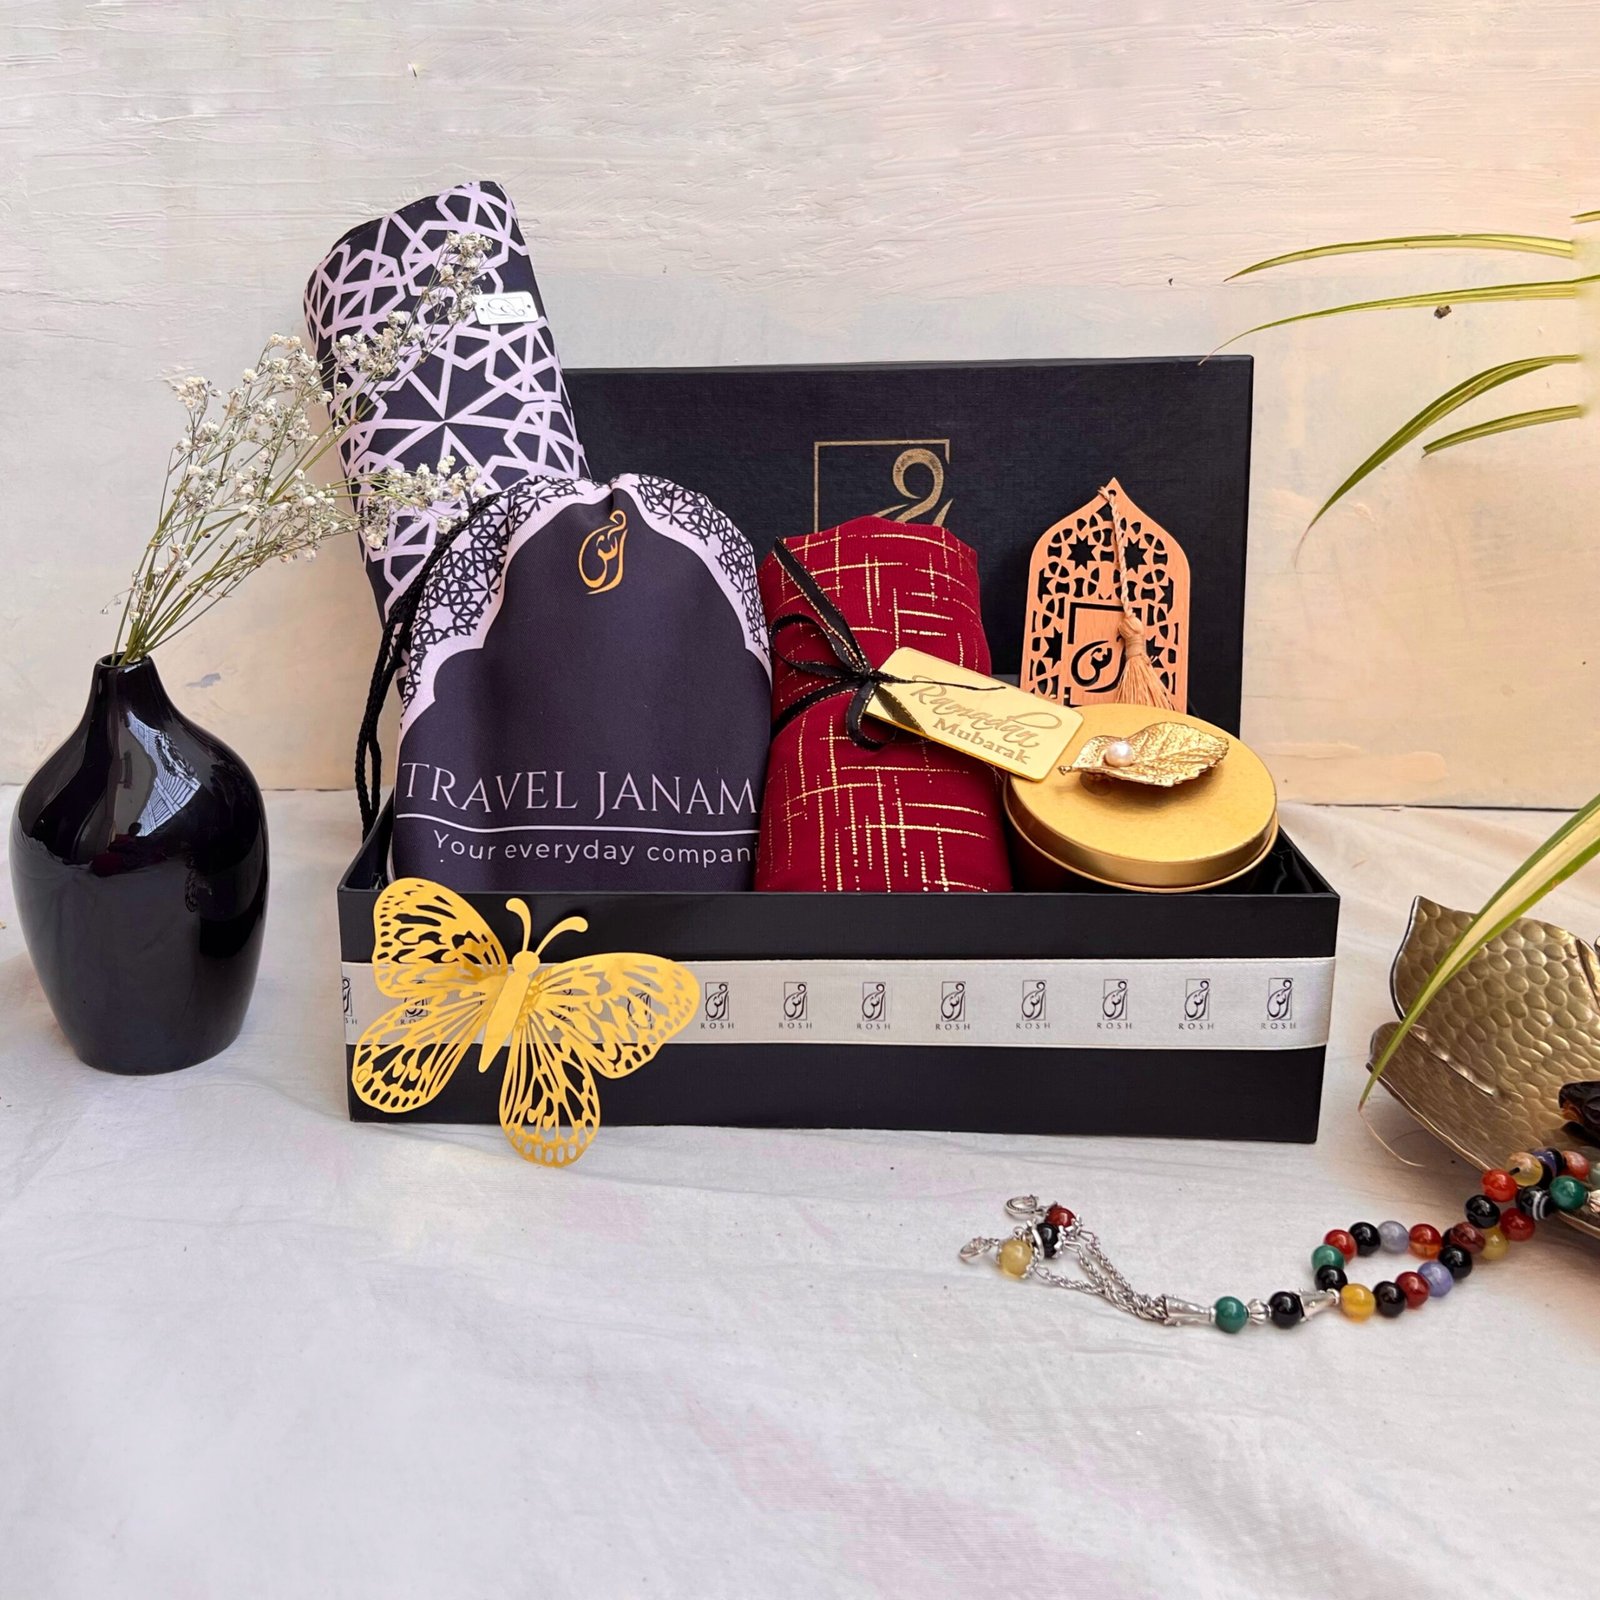 www.instagram.com/datedelicacy Our date gift hampers make the classic gifts.  | Ramadan gifts, Eid mubarak gift, Eid gifts